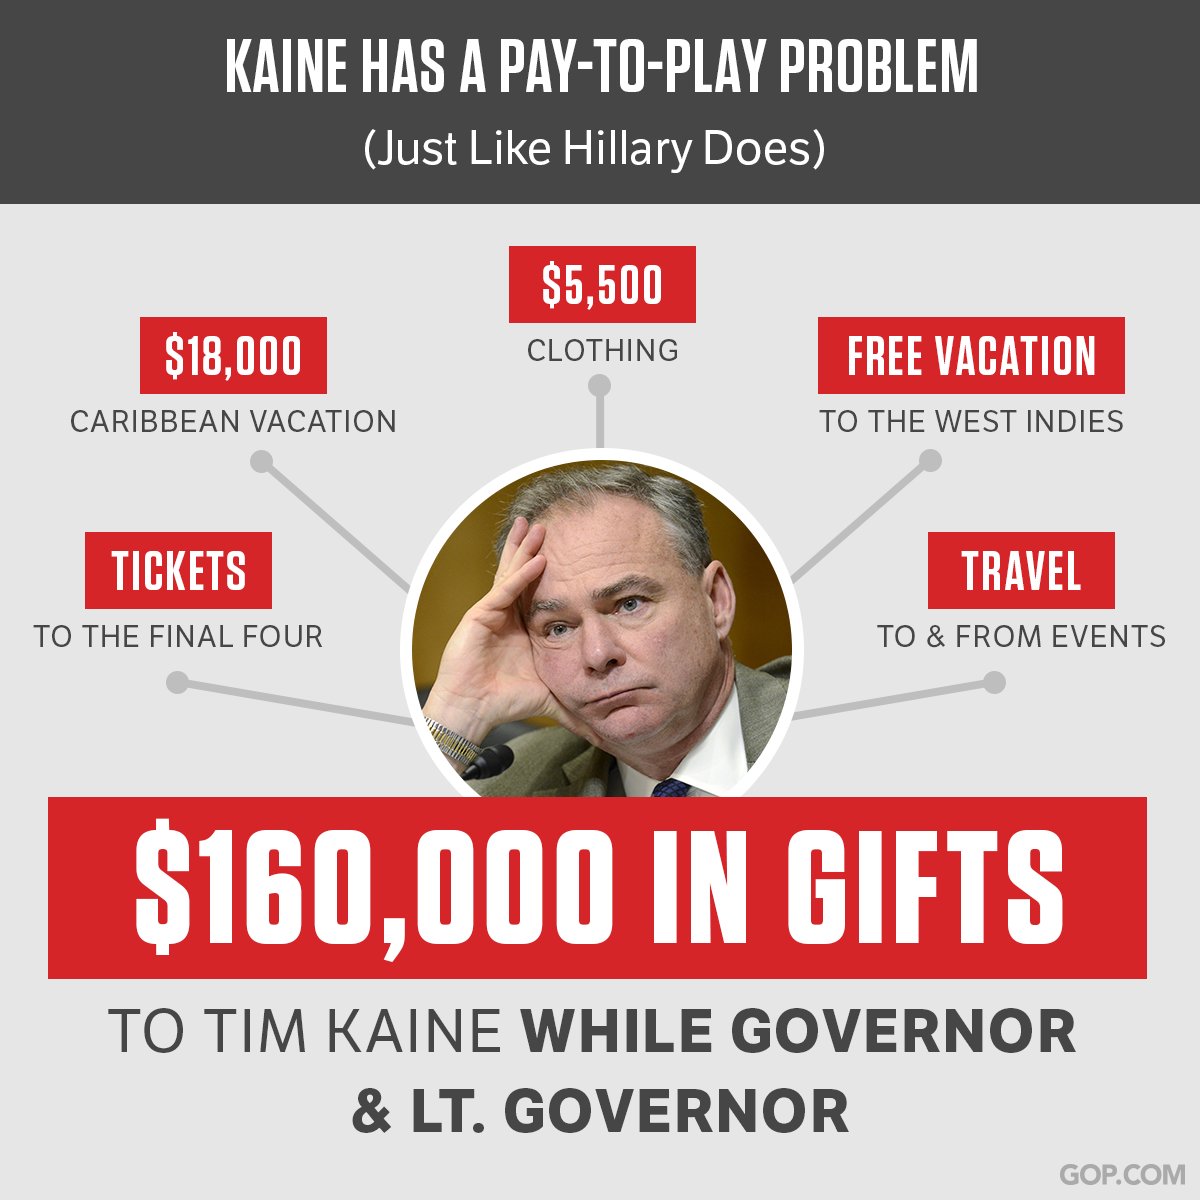 Tim Kaine took $160,000 in gifts, like Bob McDonnell